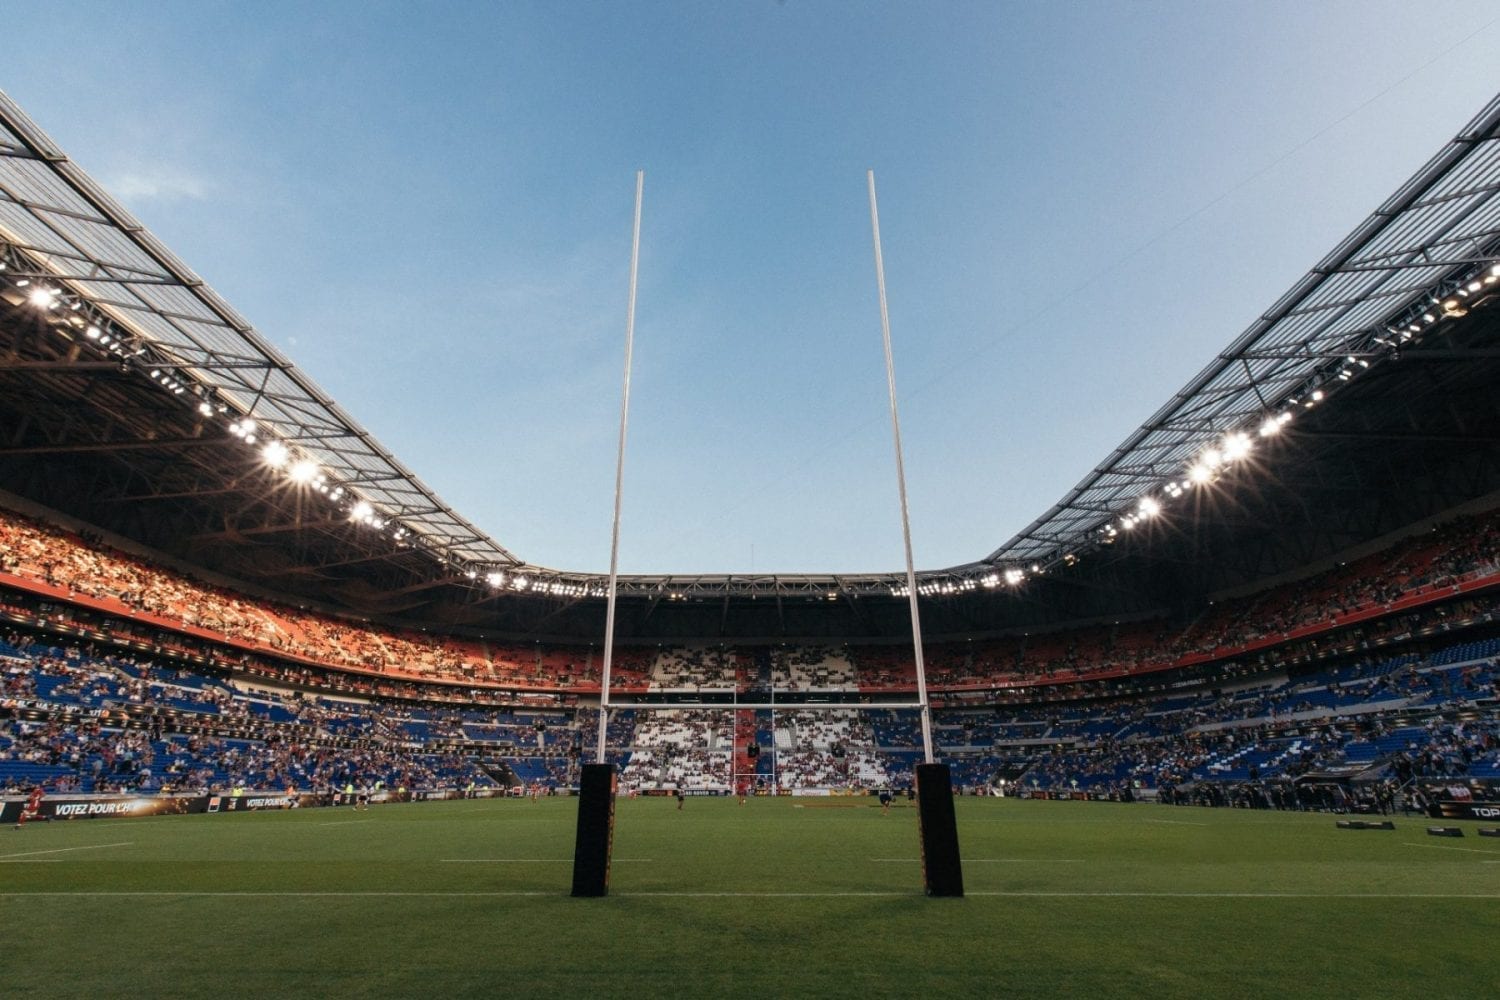 A rugby pitch in a large stadium